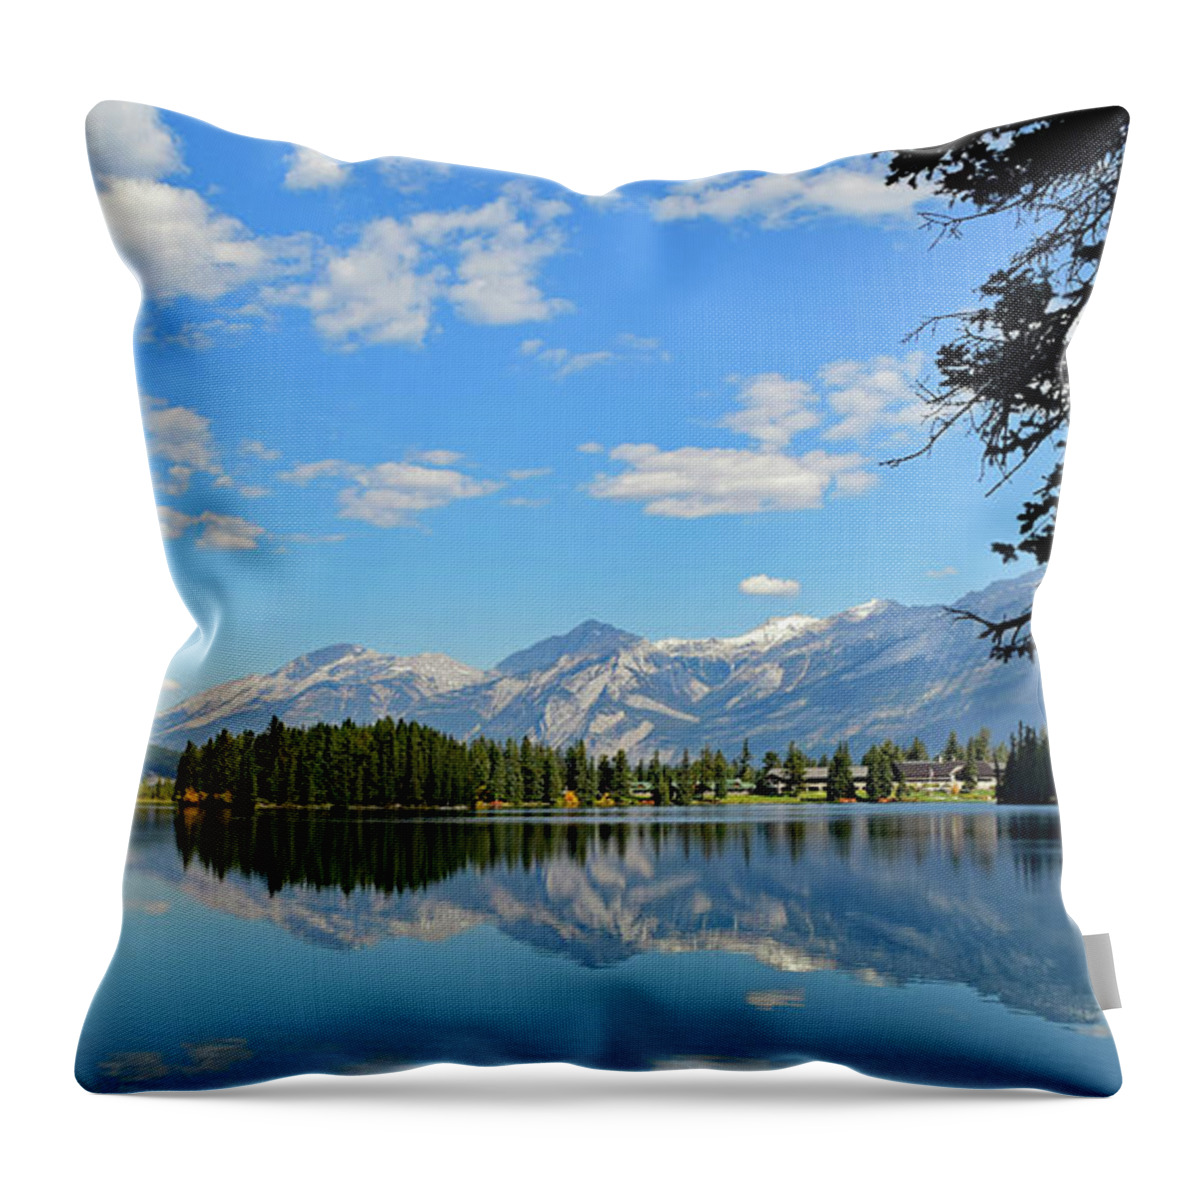 Canadian Rockies Throw Pillow featuring the photograph Canadian Rockies No. 4-1 by Sandy Taylor